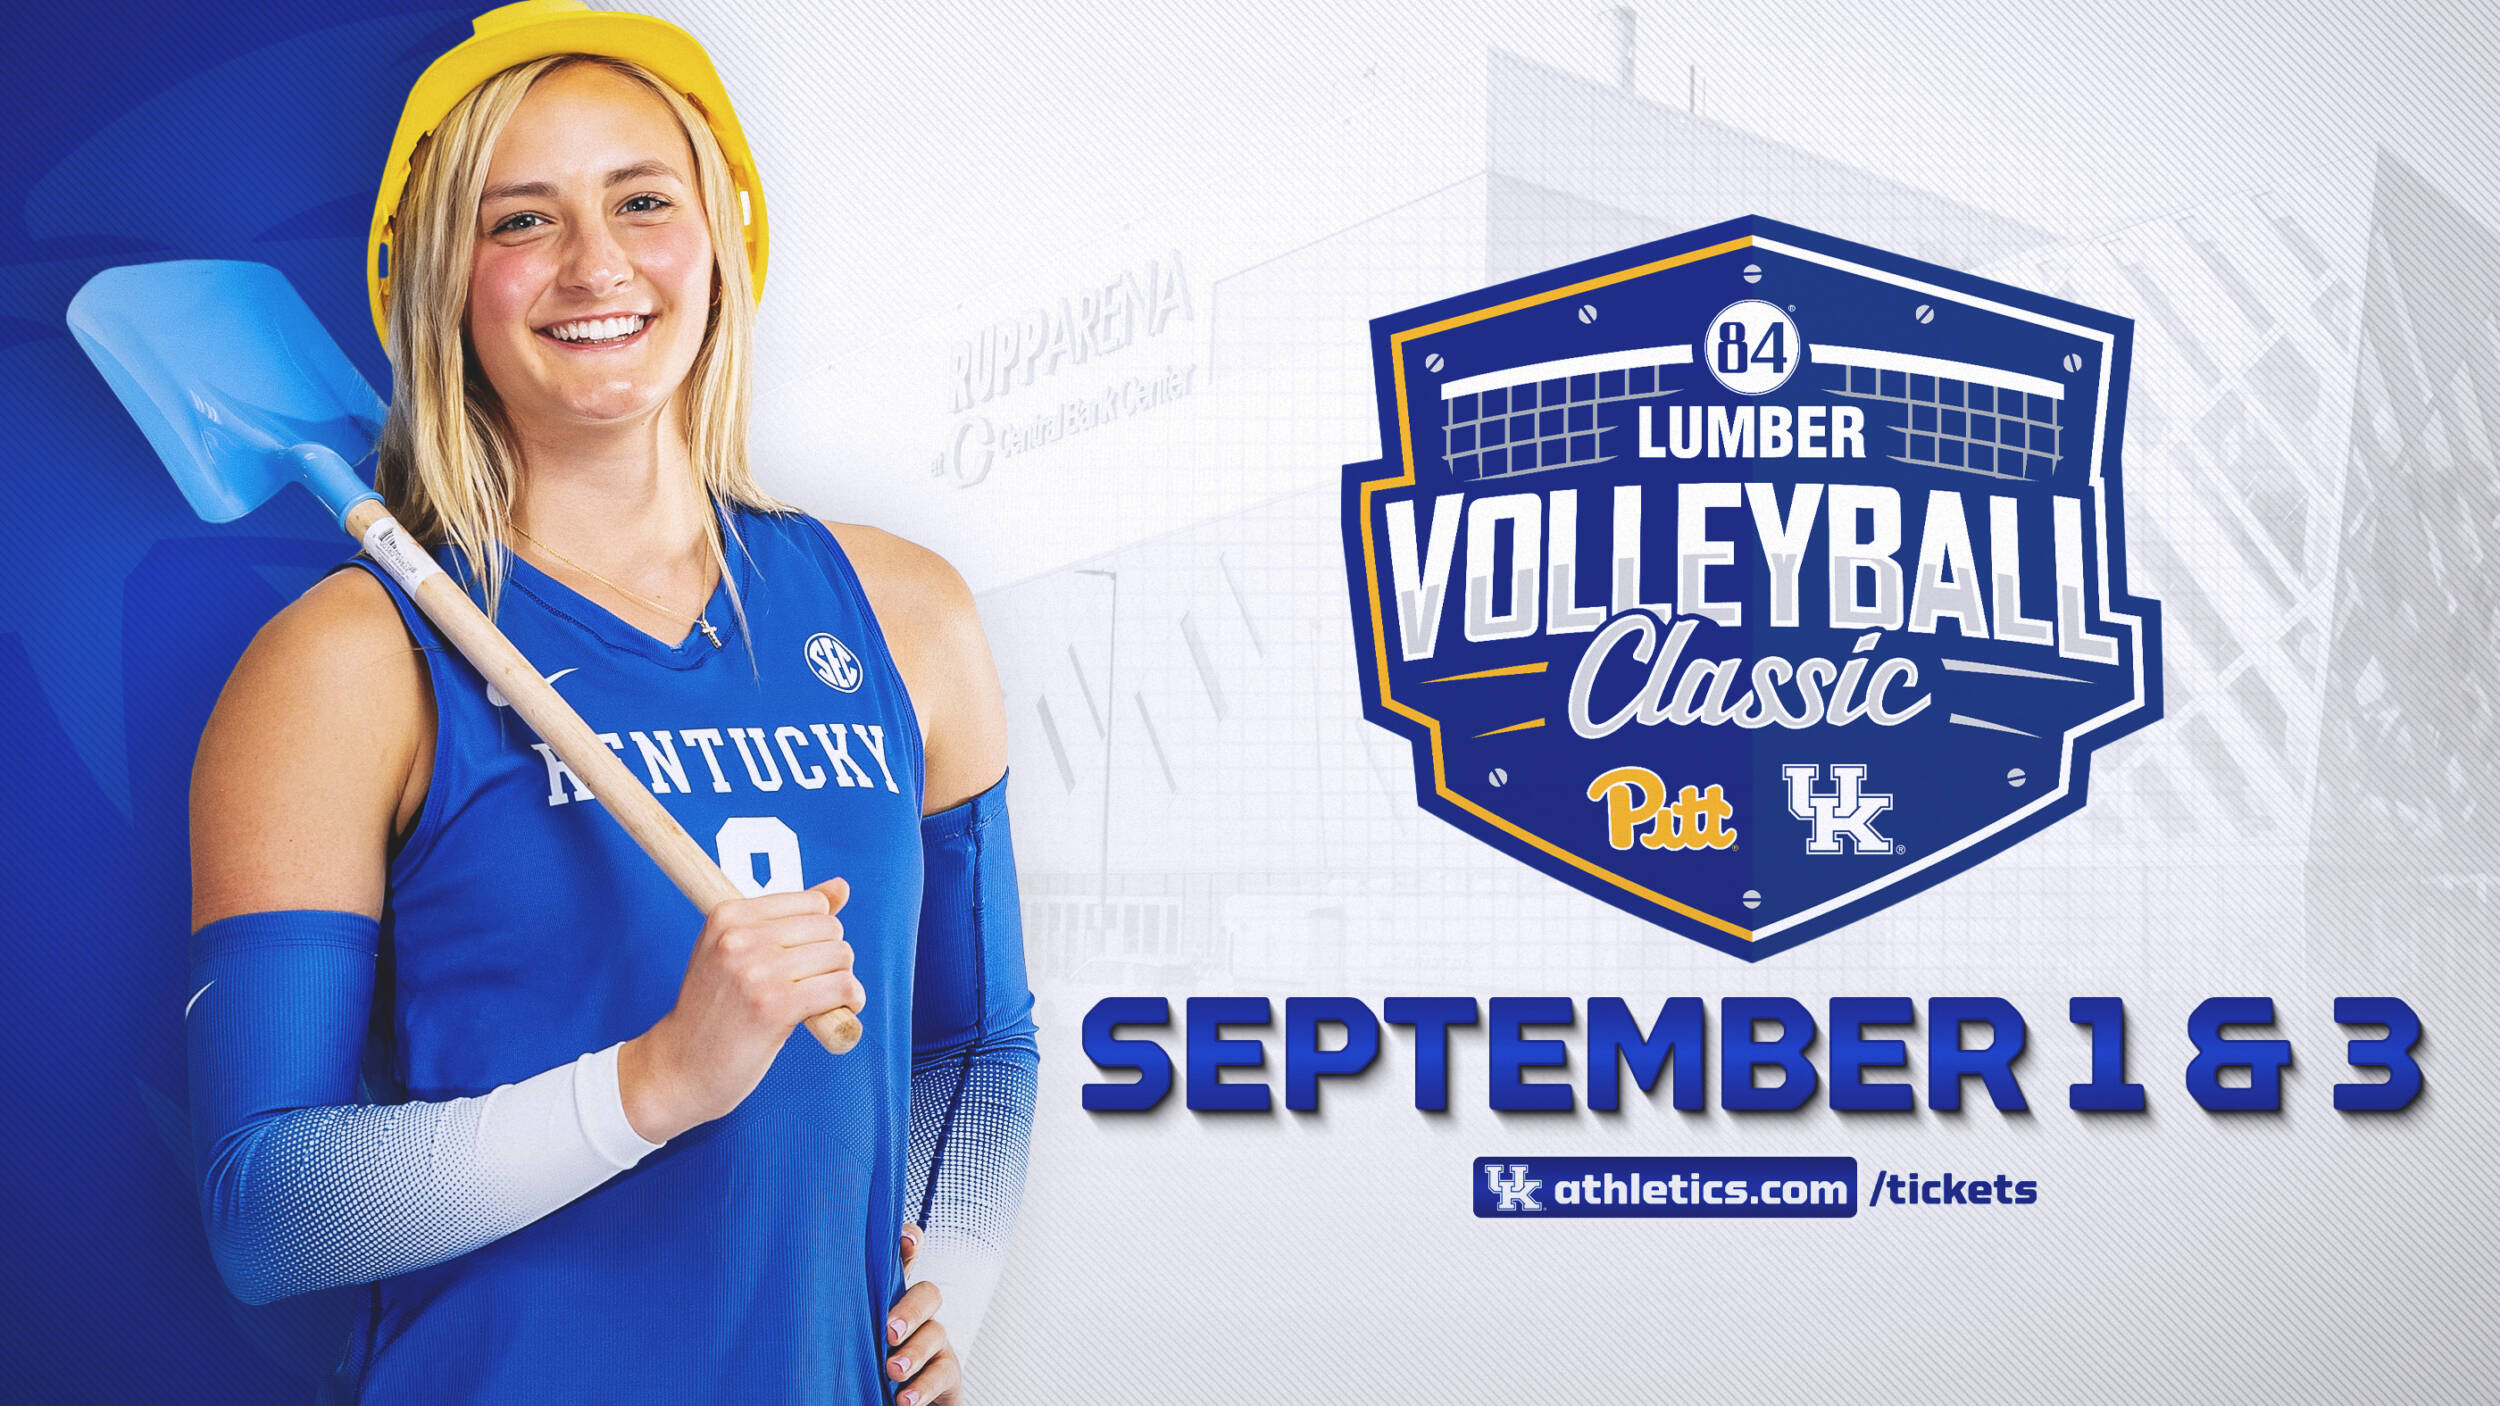 Listen to UK Sports Network Radio Coverage of Kentucky Volleyball vs Pittsburgh in the 84 Lumber Classic